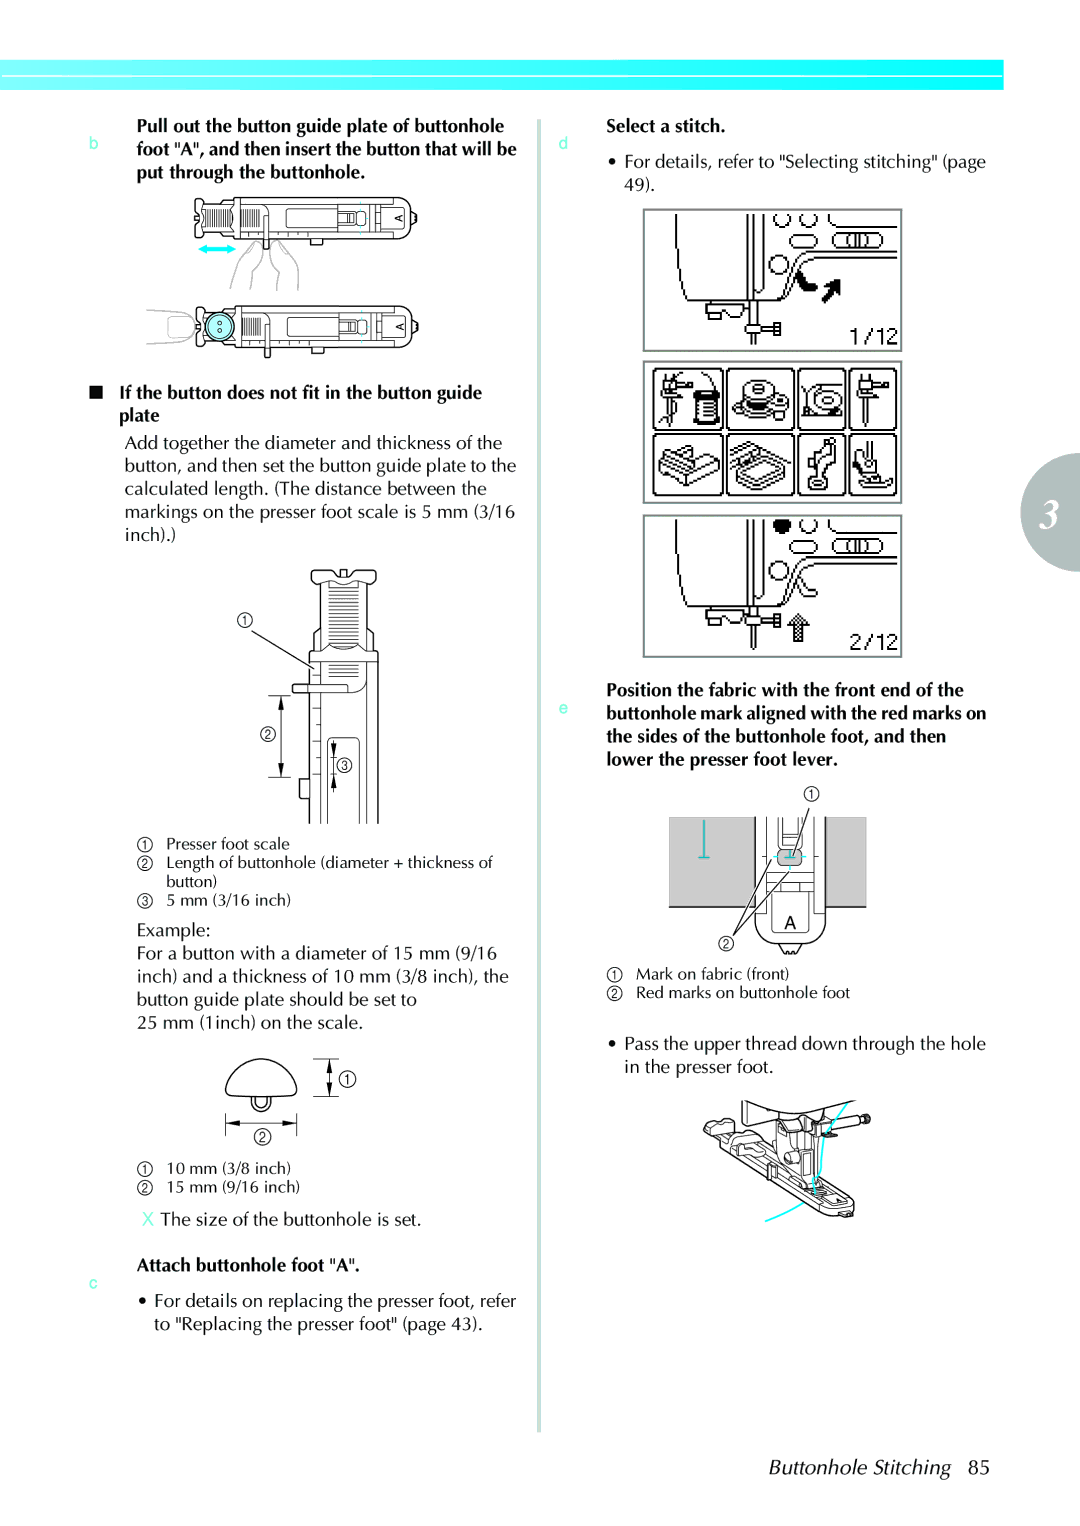 Brother 885-V31/V33 operation manual Size of the buttonhole is set, CAttach buttonhole foot a, DSelect a stitch 